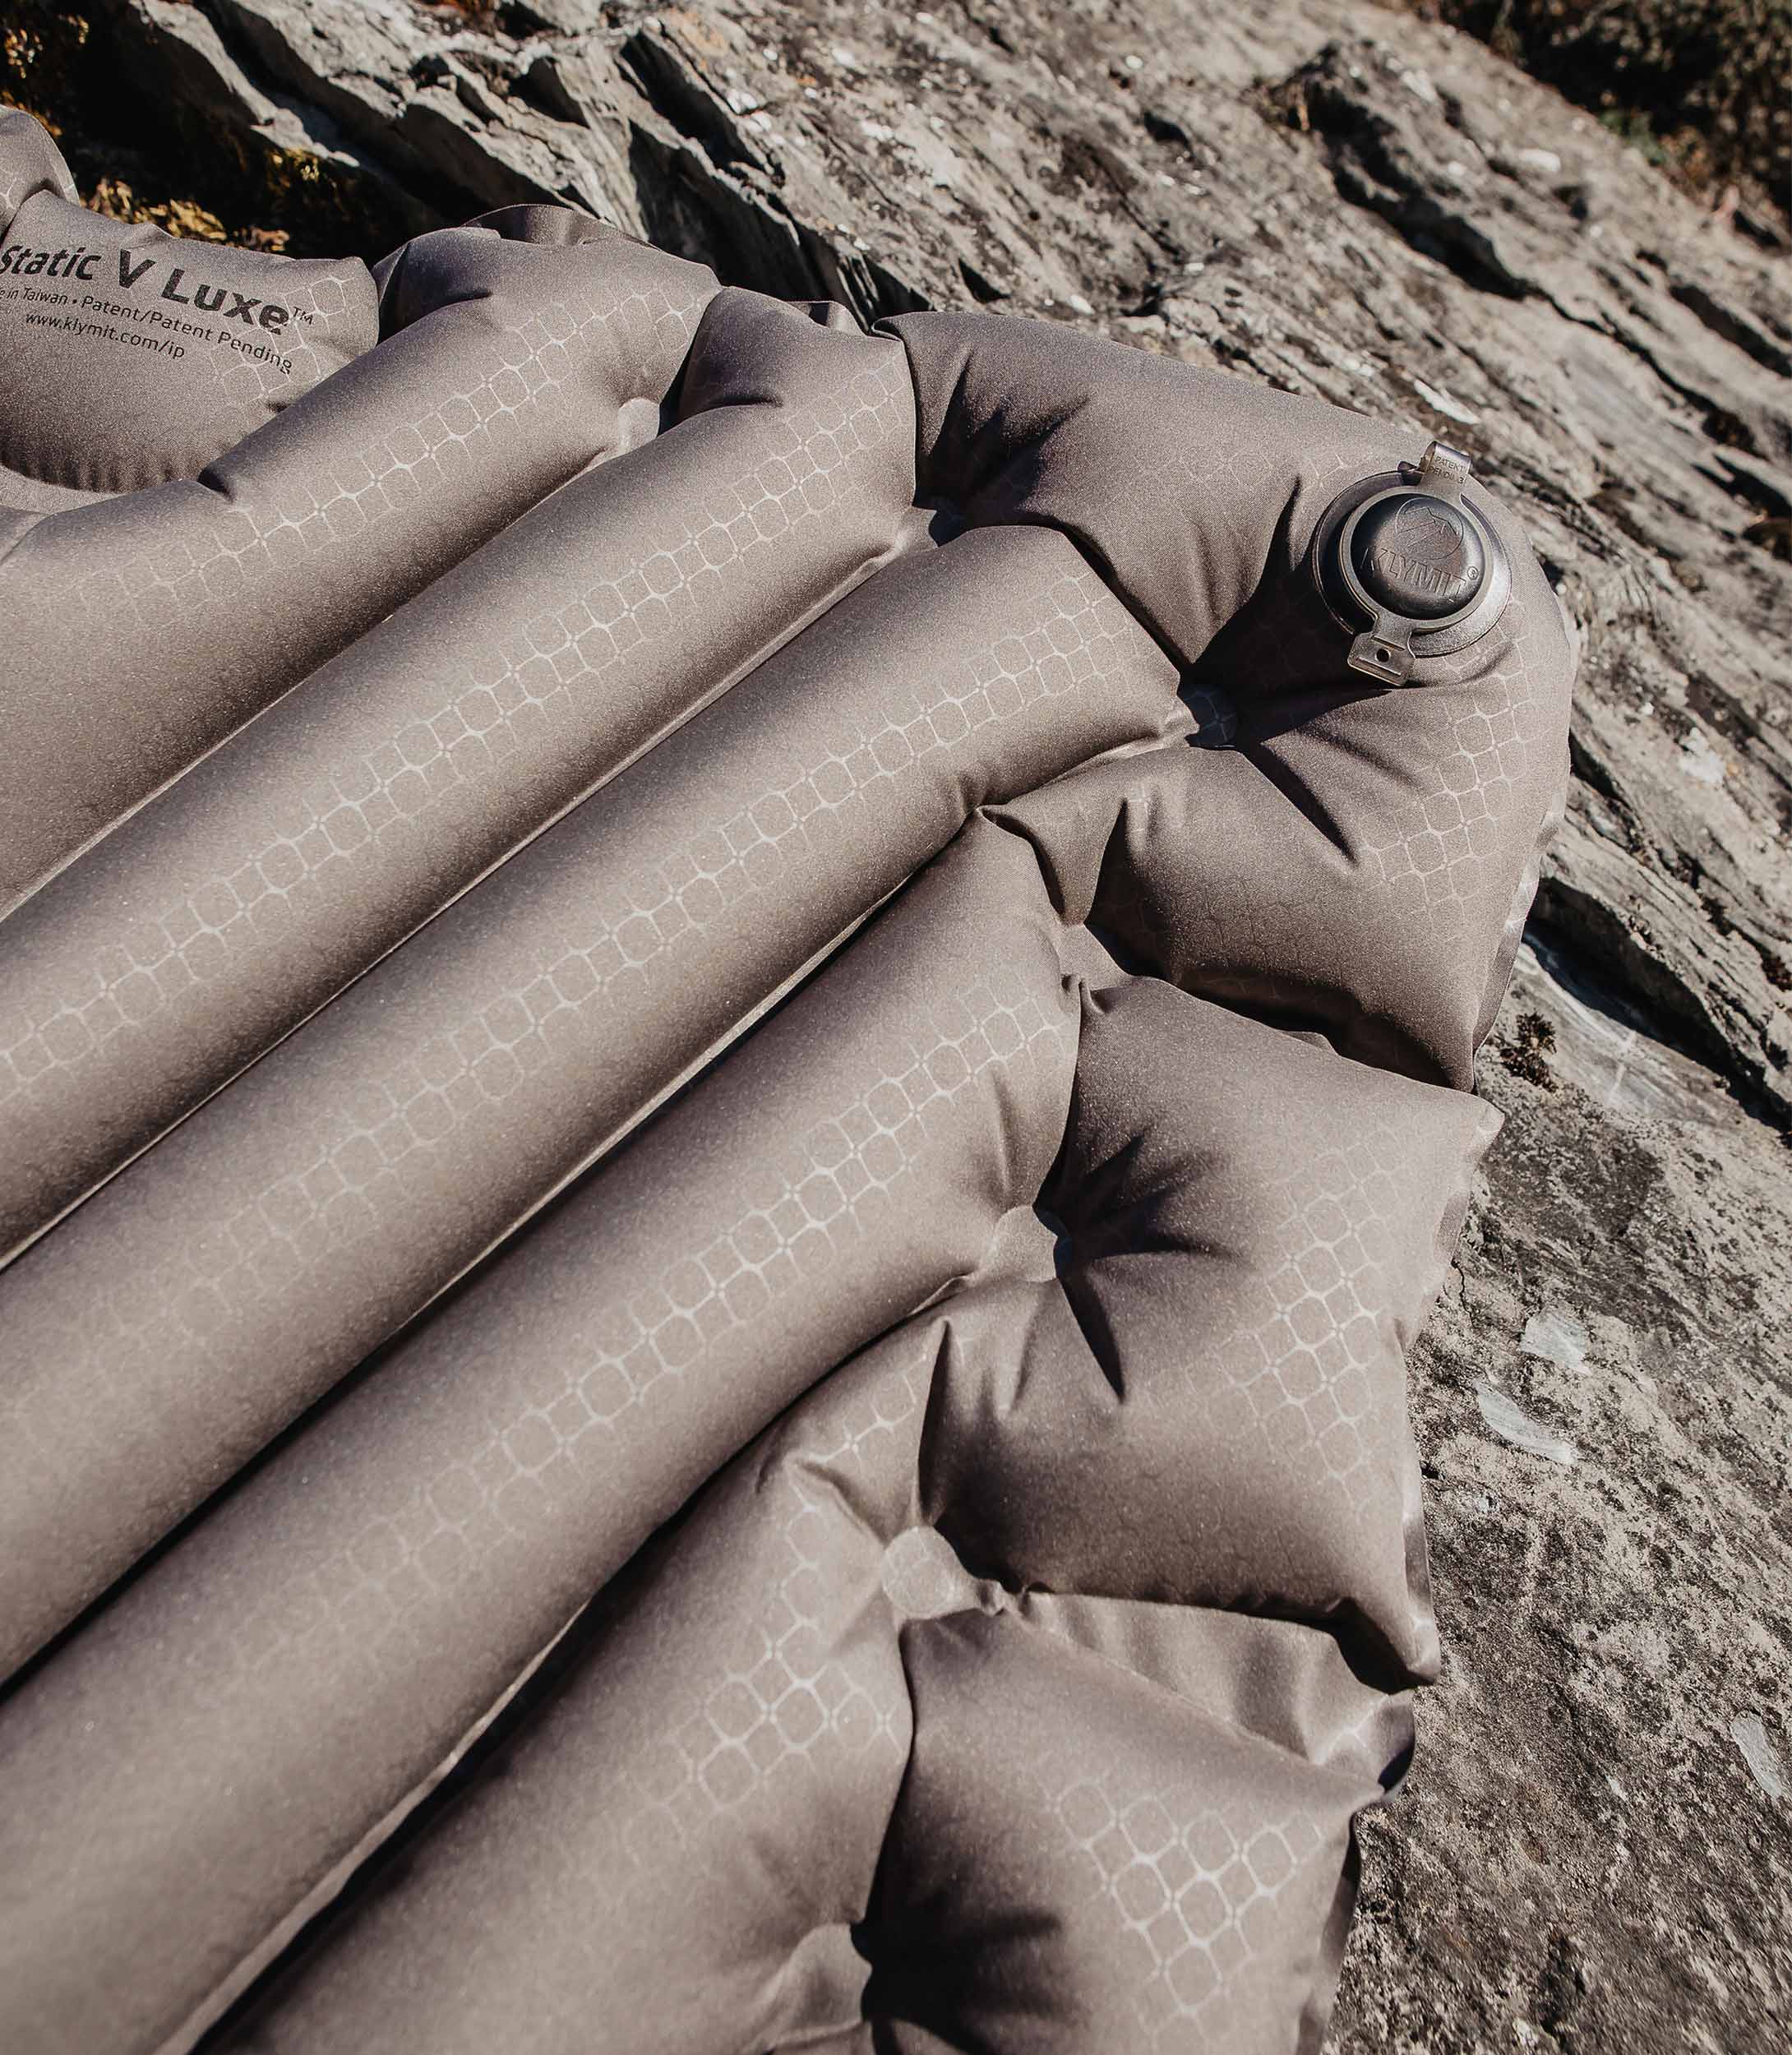 Static V Luxe ™ Sleeping Pad